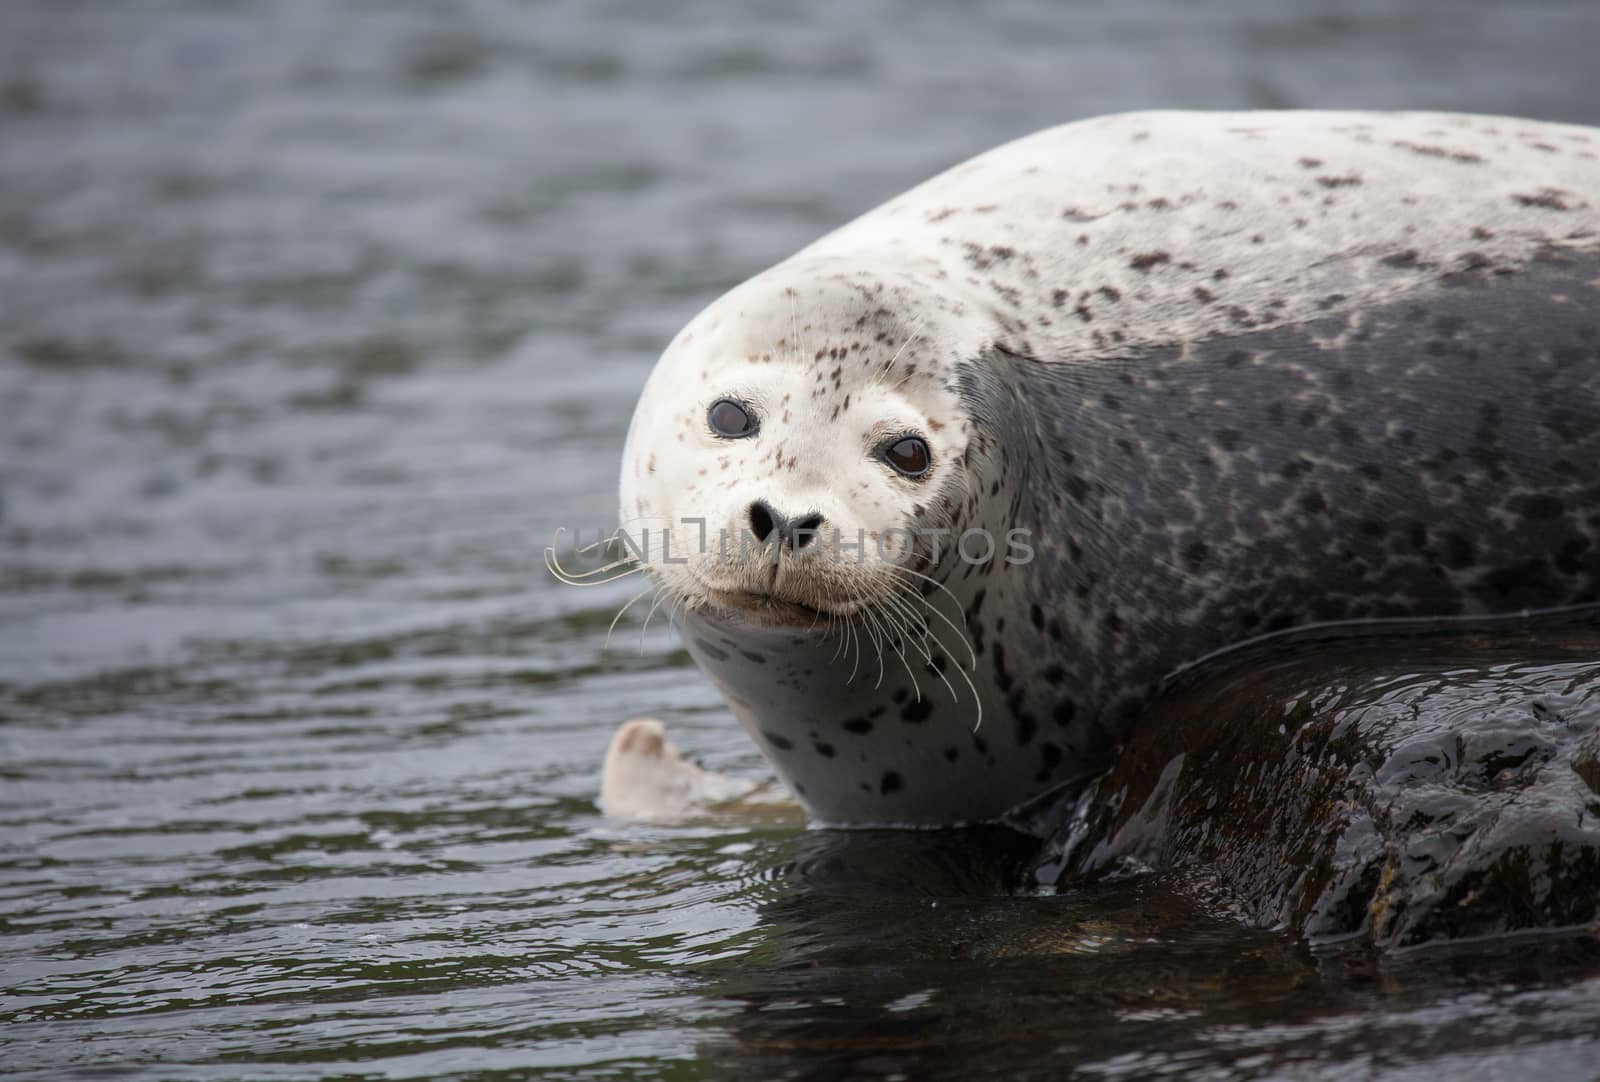 Phoca largha (Larga Seal, Spotted Seal) surface pictures